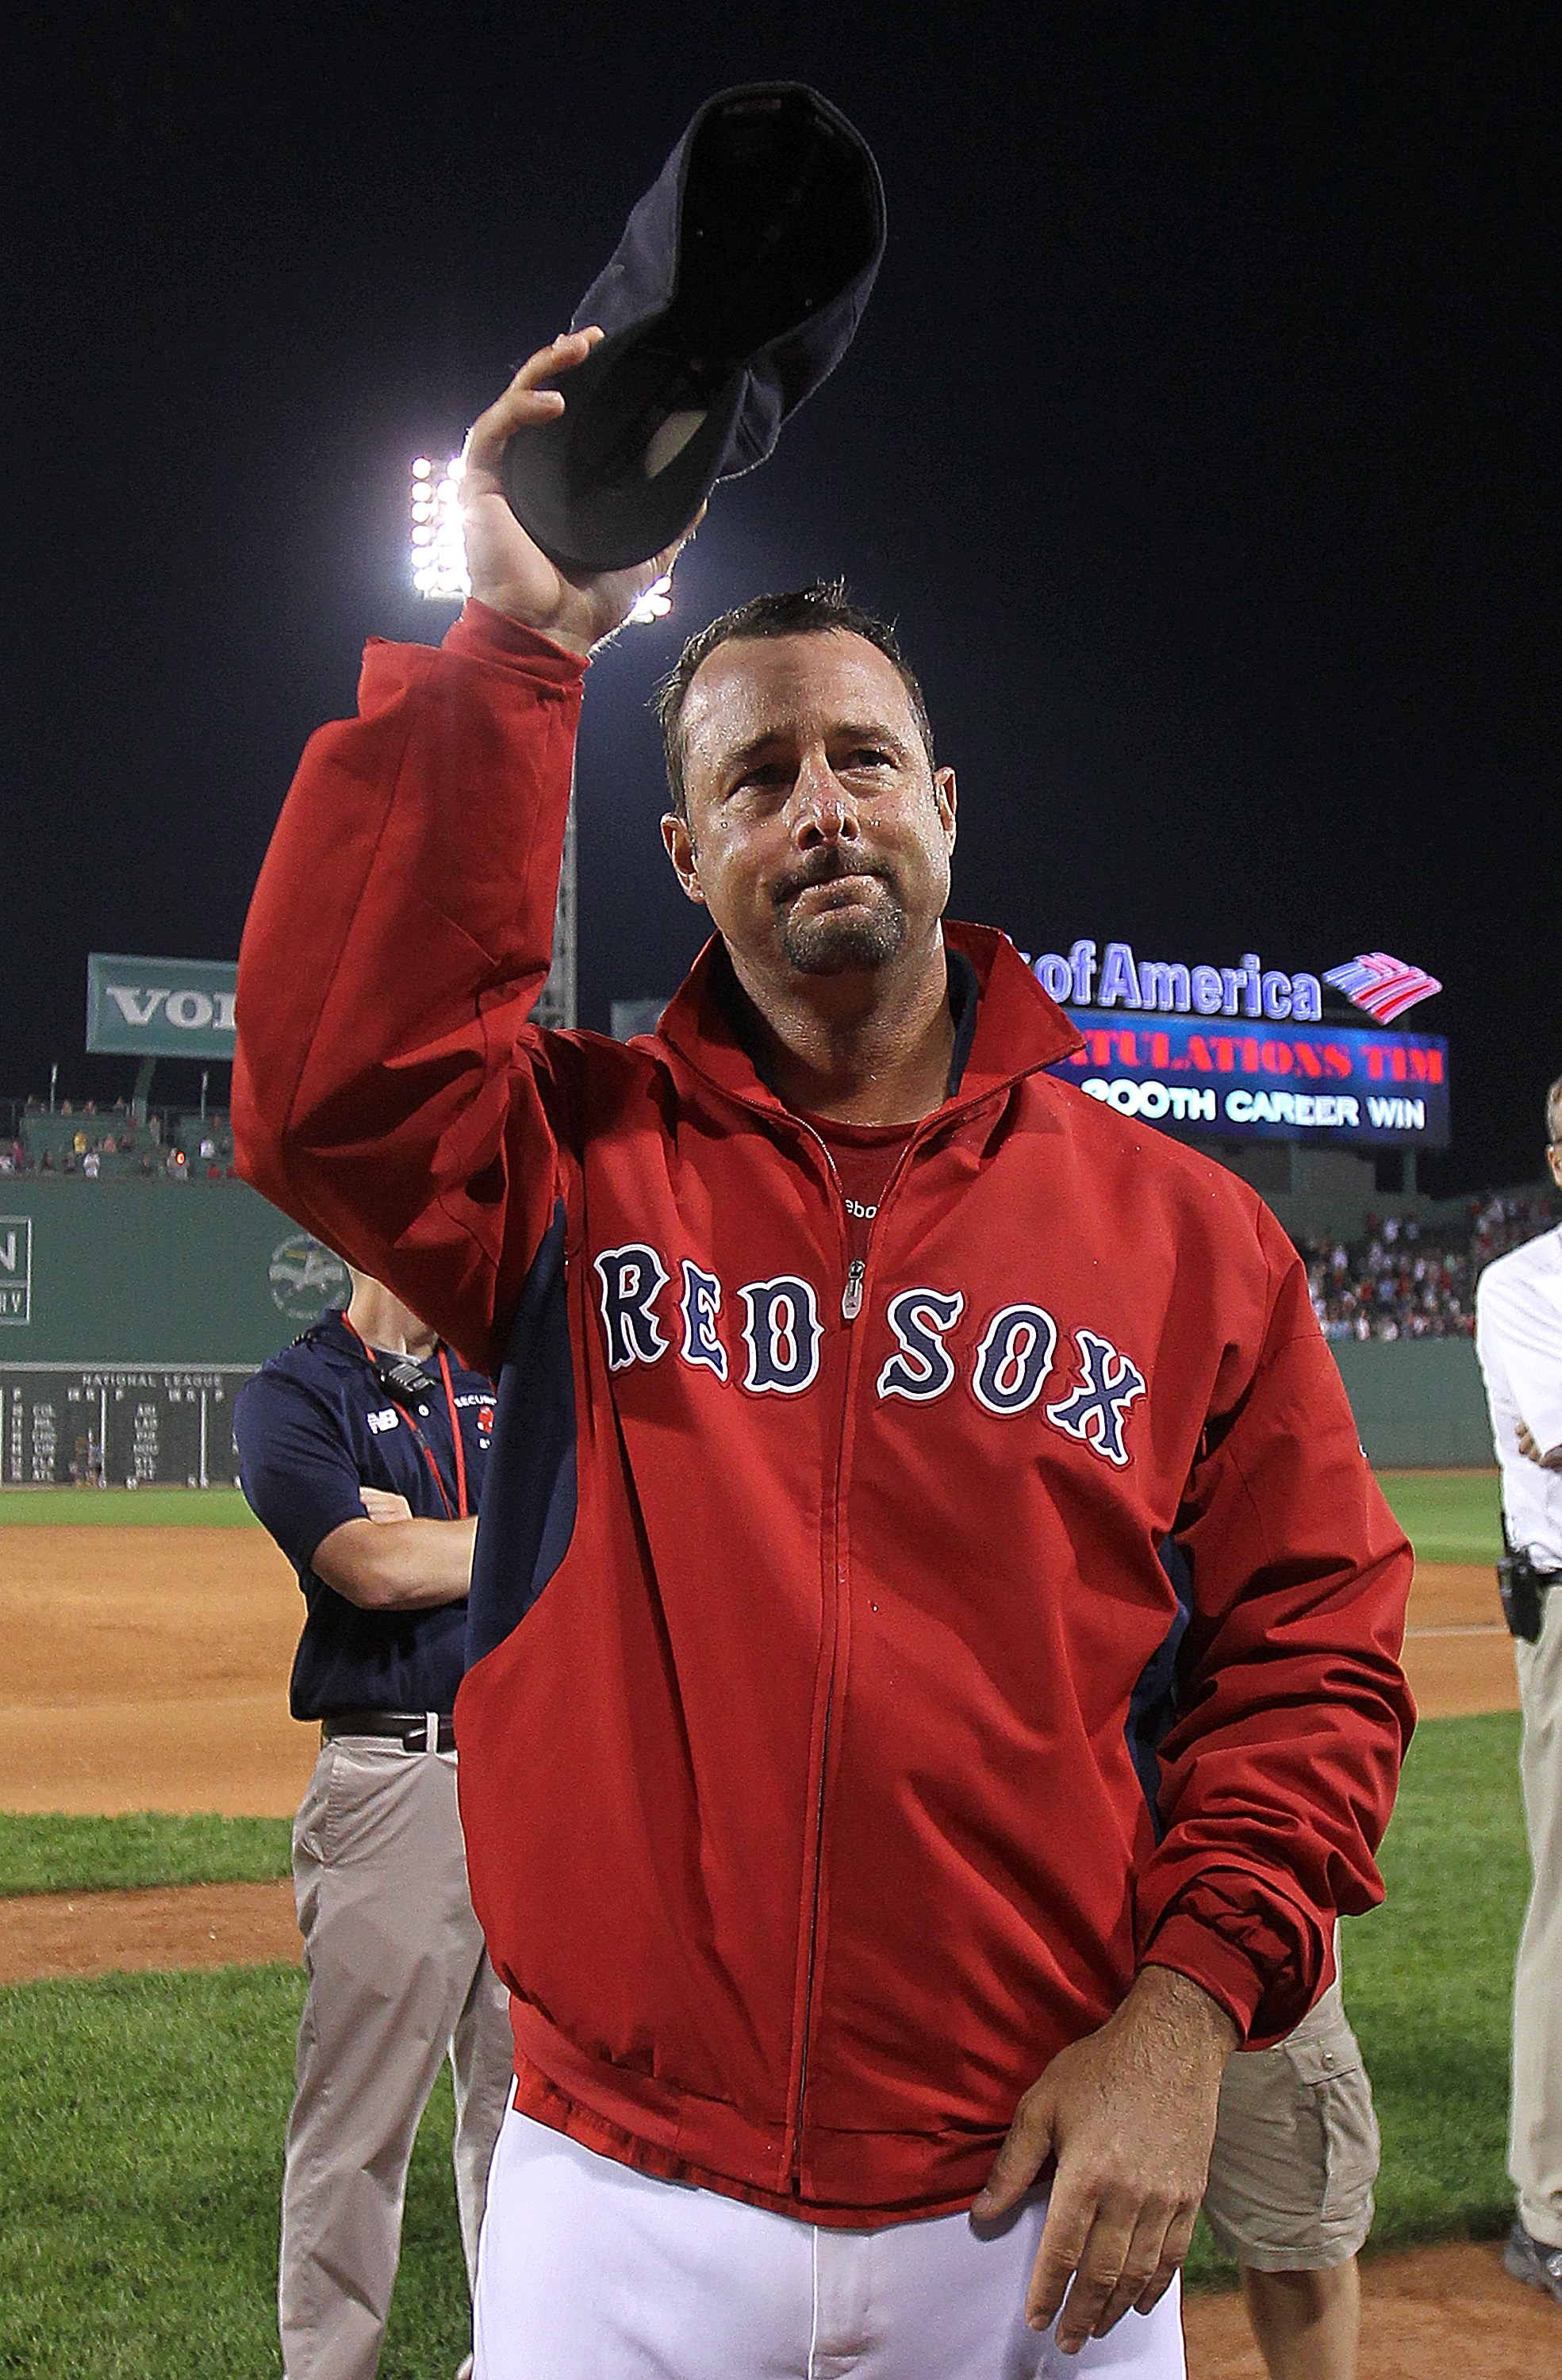 Baseball community remembers Red Sox pitcher Tim Wakefield